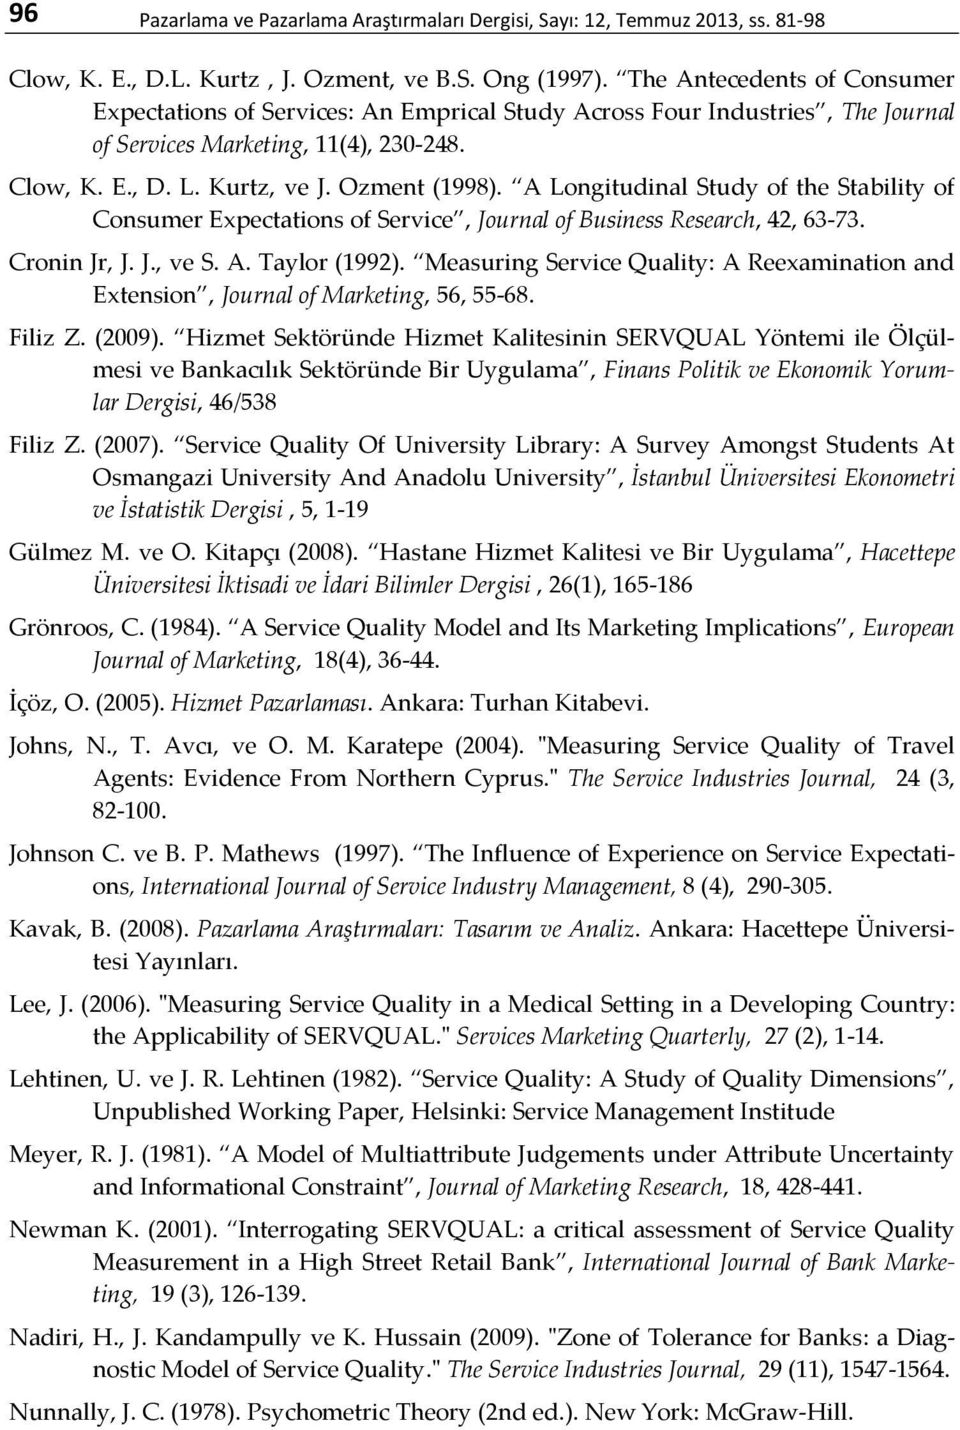 A Longitudinal Study of the Stability of Consumer Expectations of Service, Journal of Business Research, 42, 63-73. Cronin Jr, J. J., ve S. A. Taylor (1992).